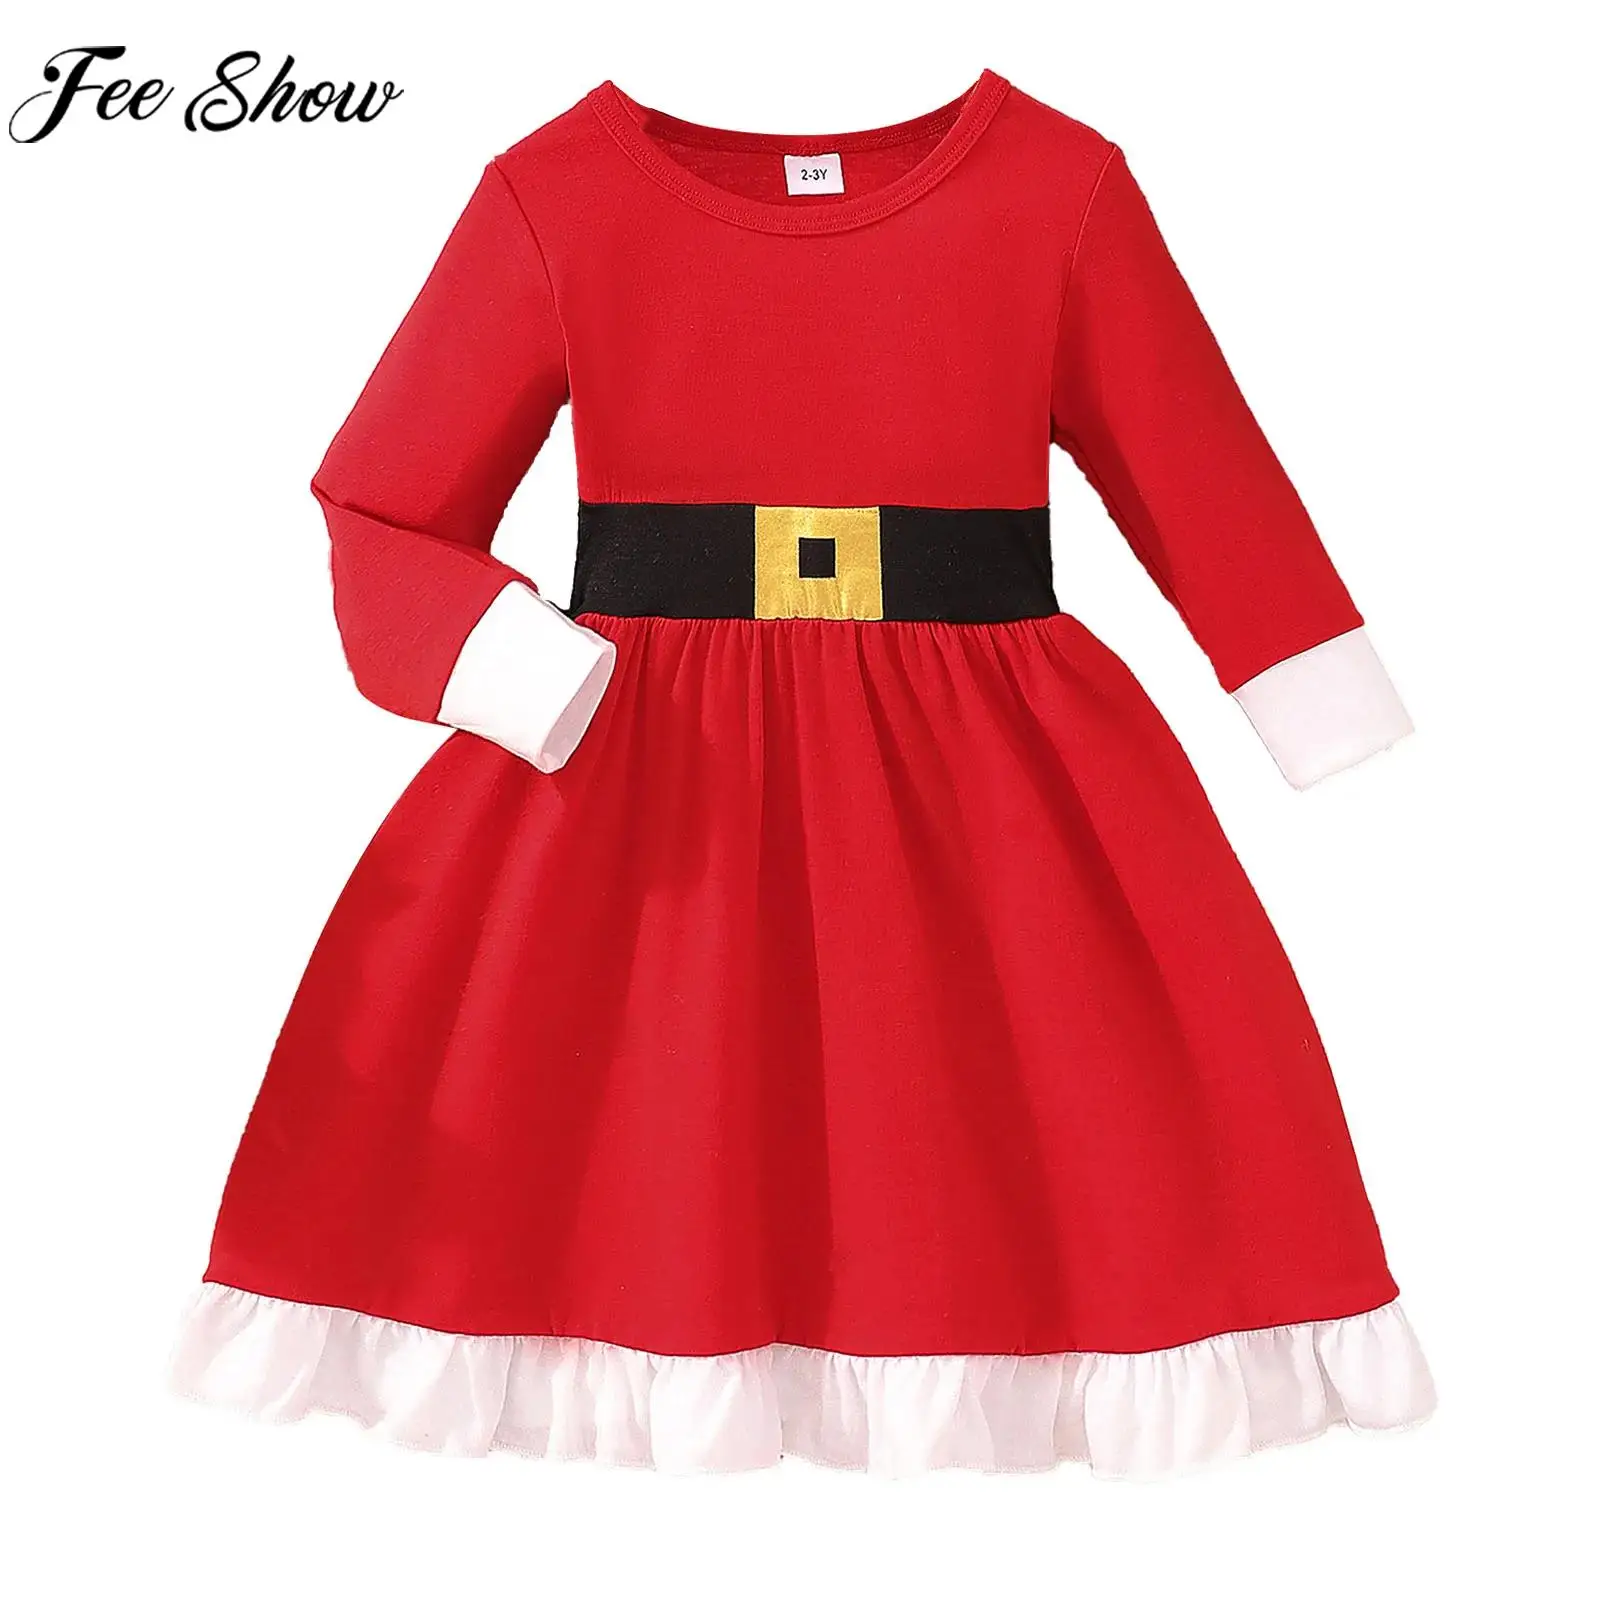 

Children Girls Christmas Party Dress Xmas Eve New Year Carnival Santa Claus Cosplay Costume Long Sleeve Ruffle A-line Dresses